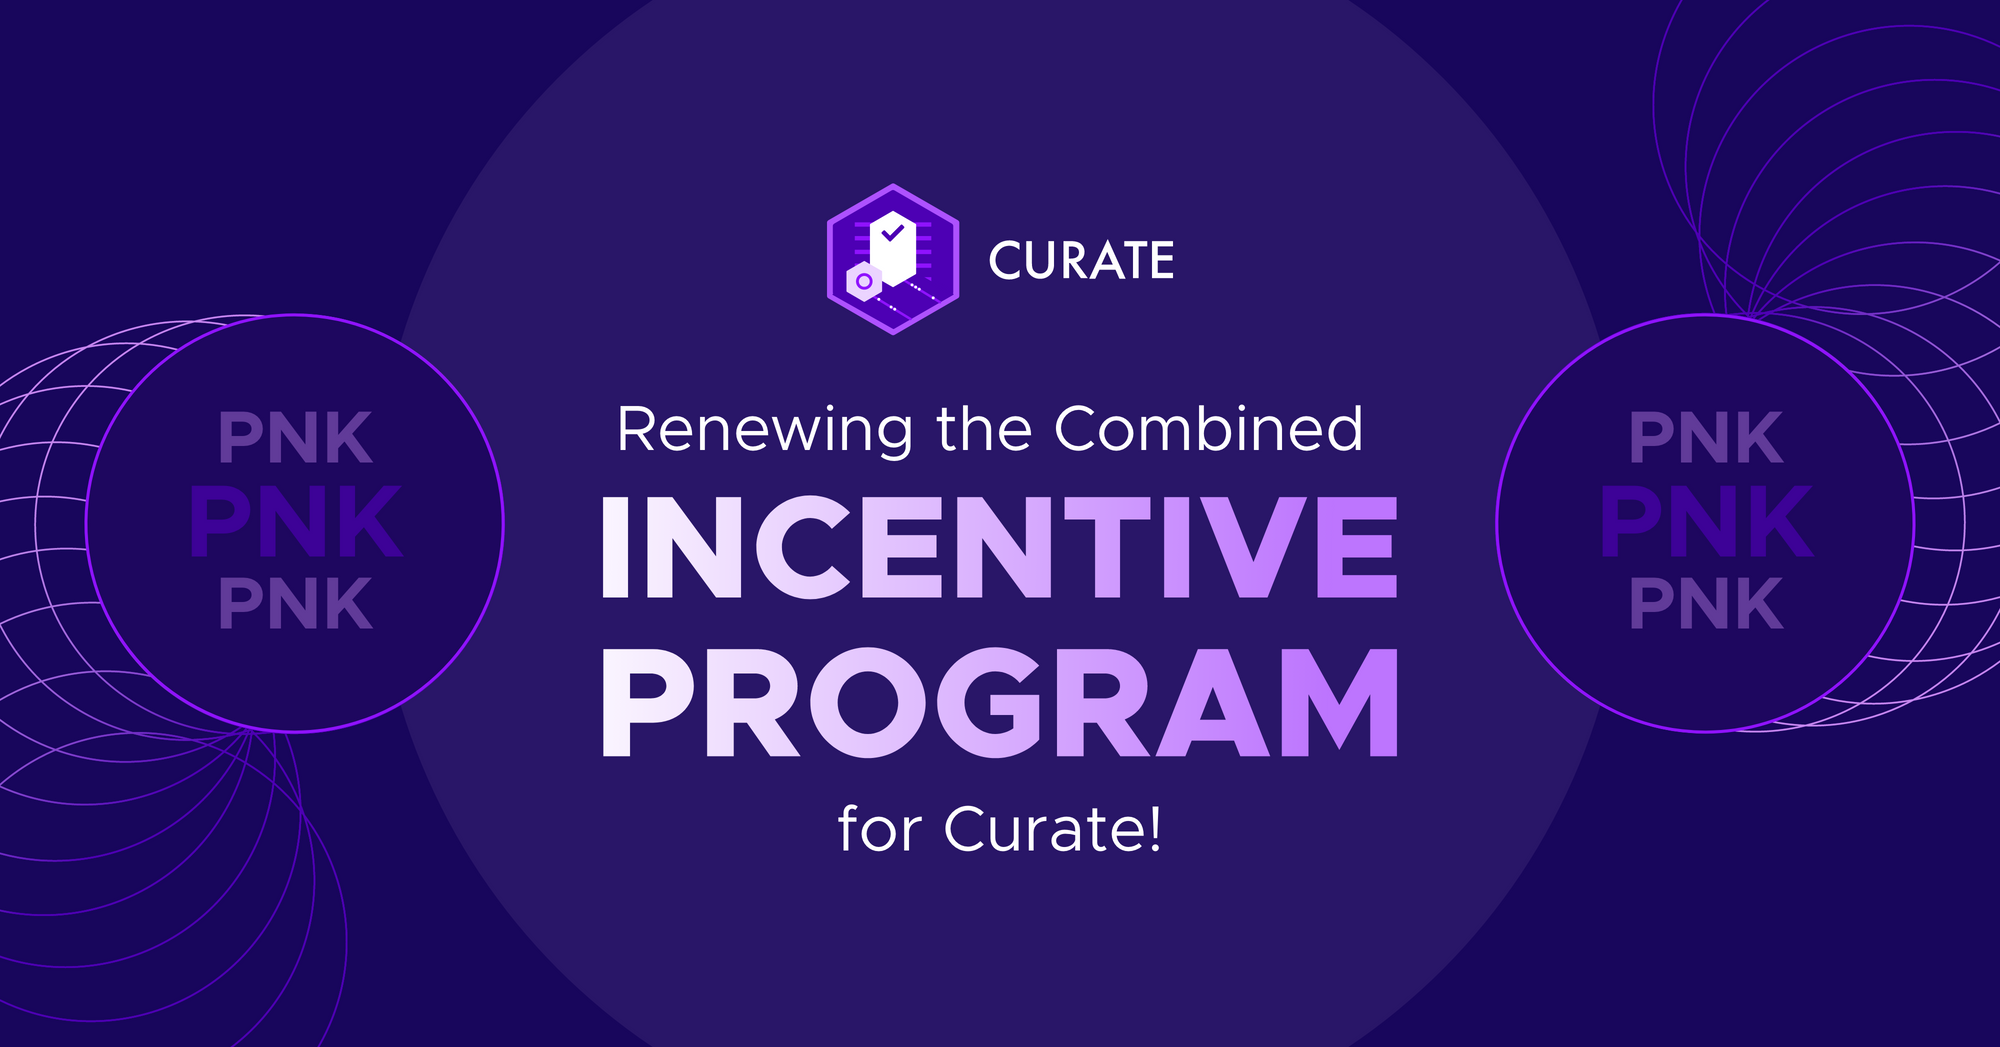 Renewing the Combined Incentive Program for Curate!